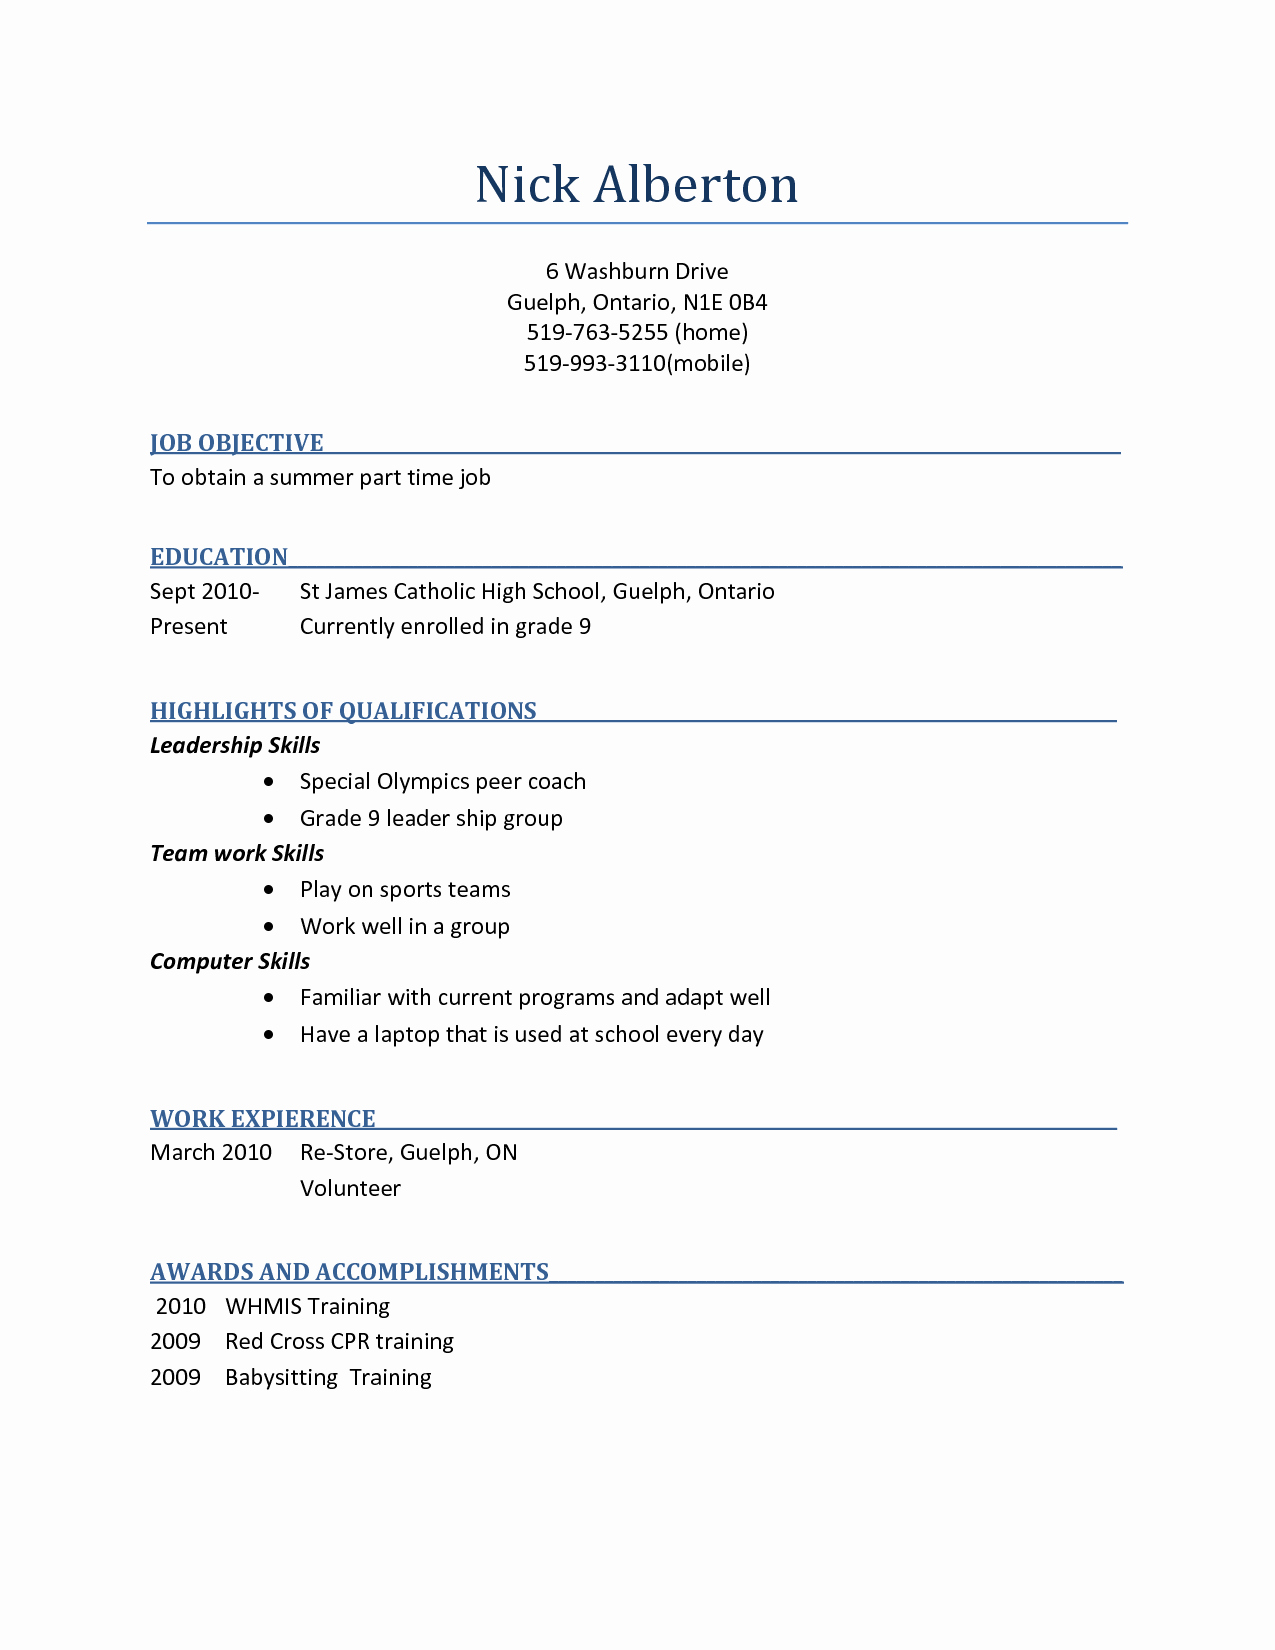 Useful Sample Resume for First Part Time Job